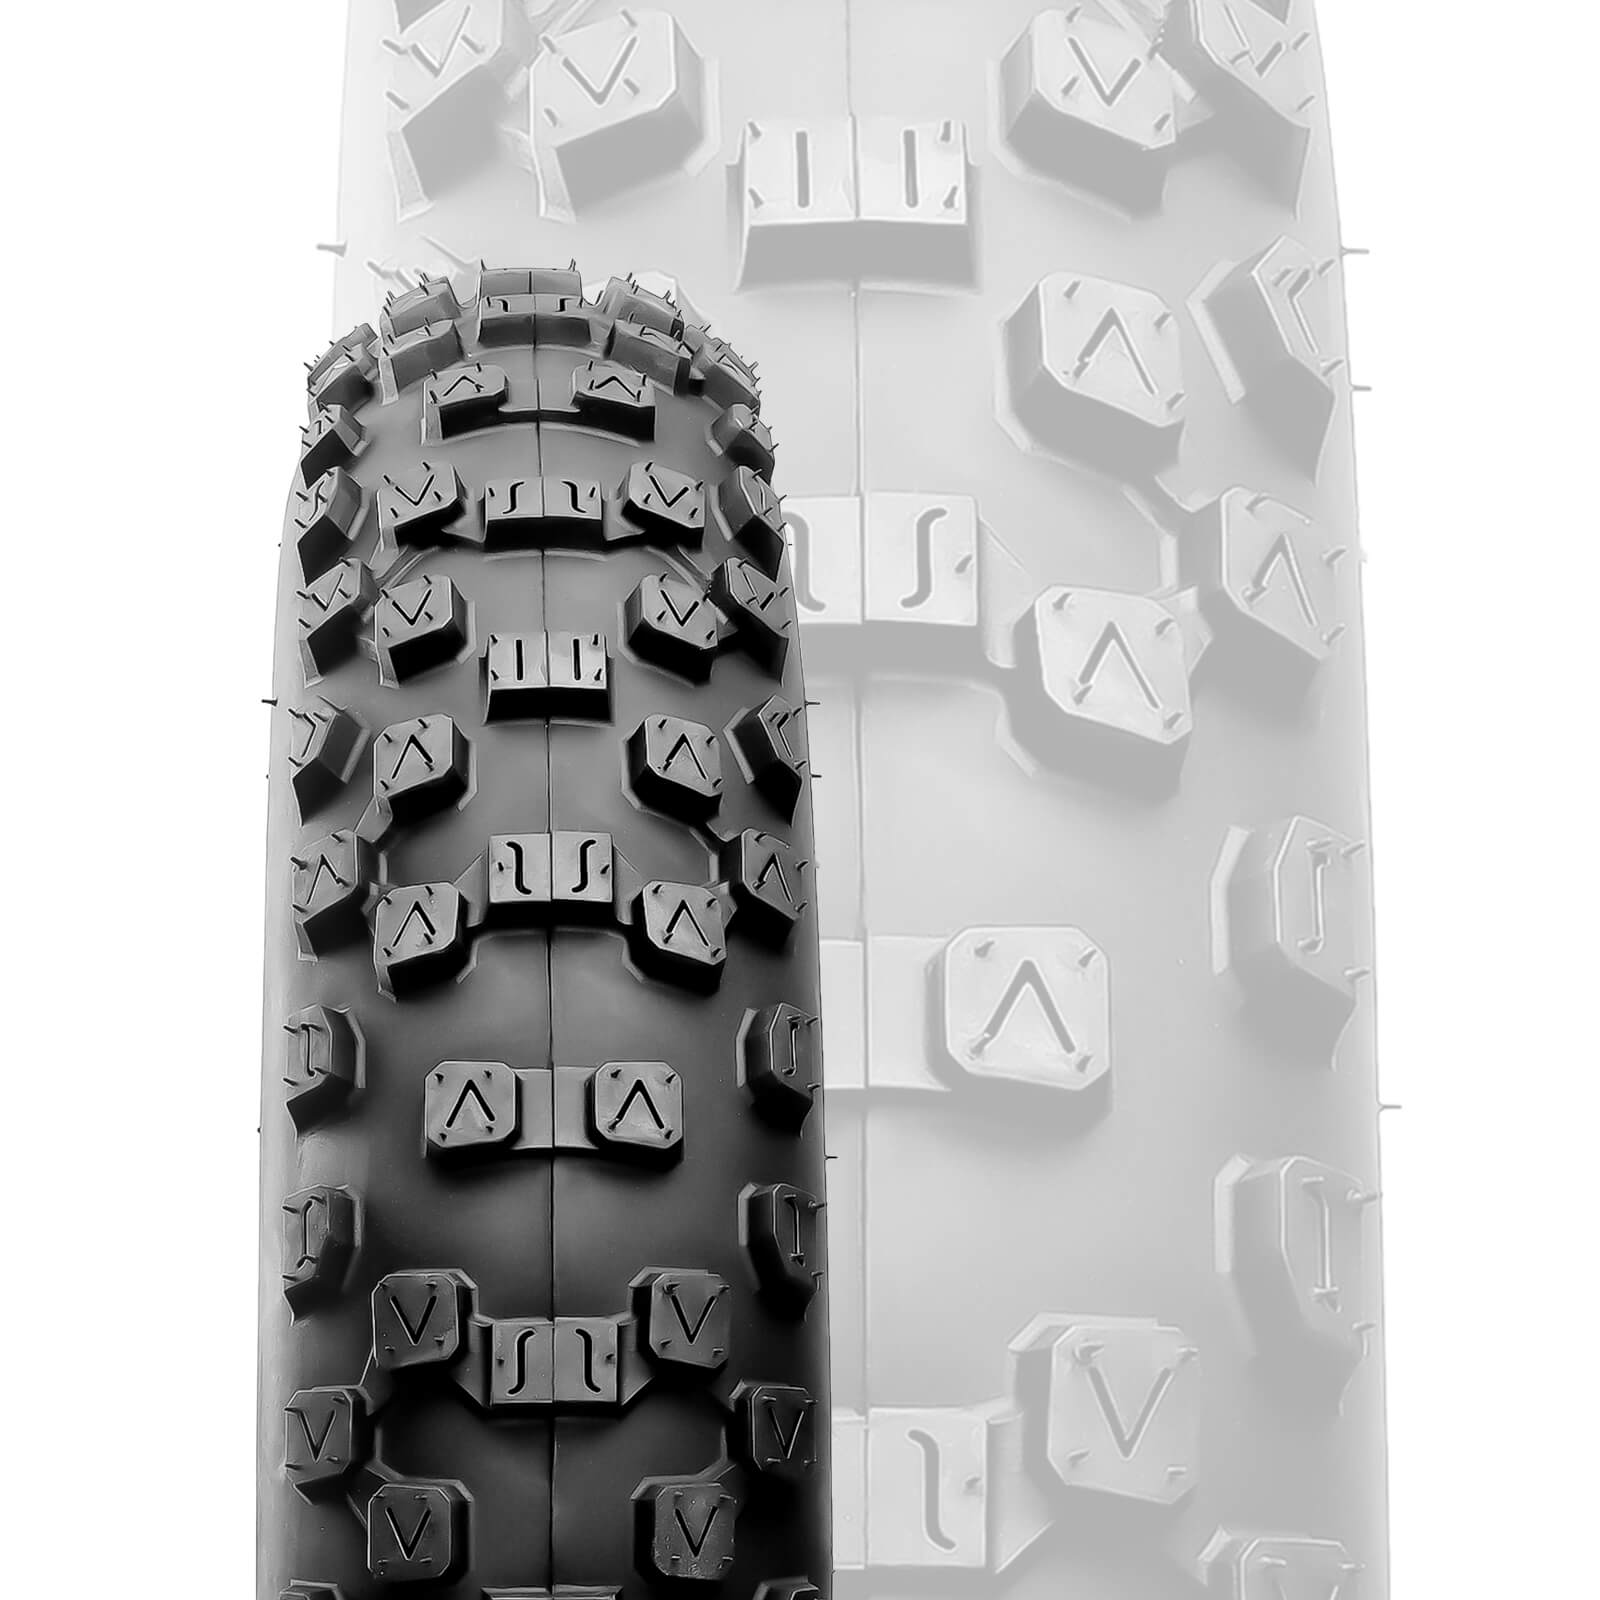 Hycline 20 "x4" studded knobs tread mountain fat bike tire suitable for challenging terrains: rocks, mud, and snow